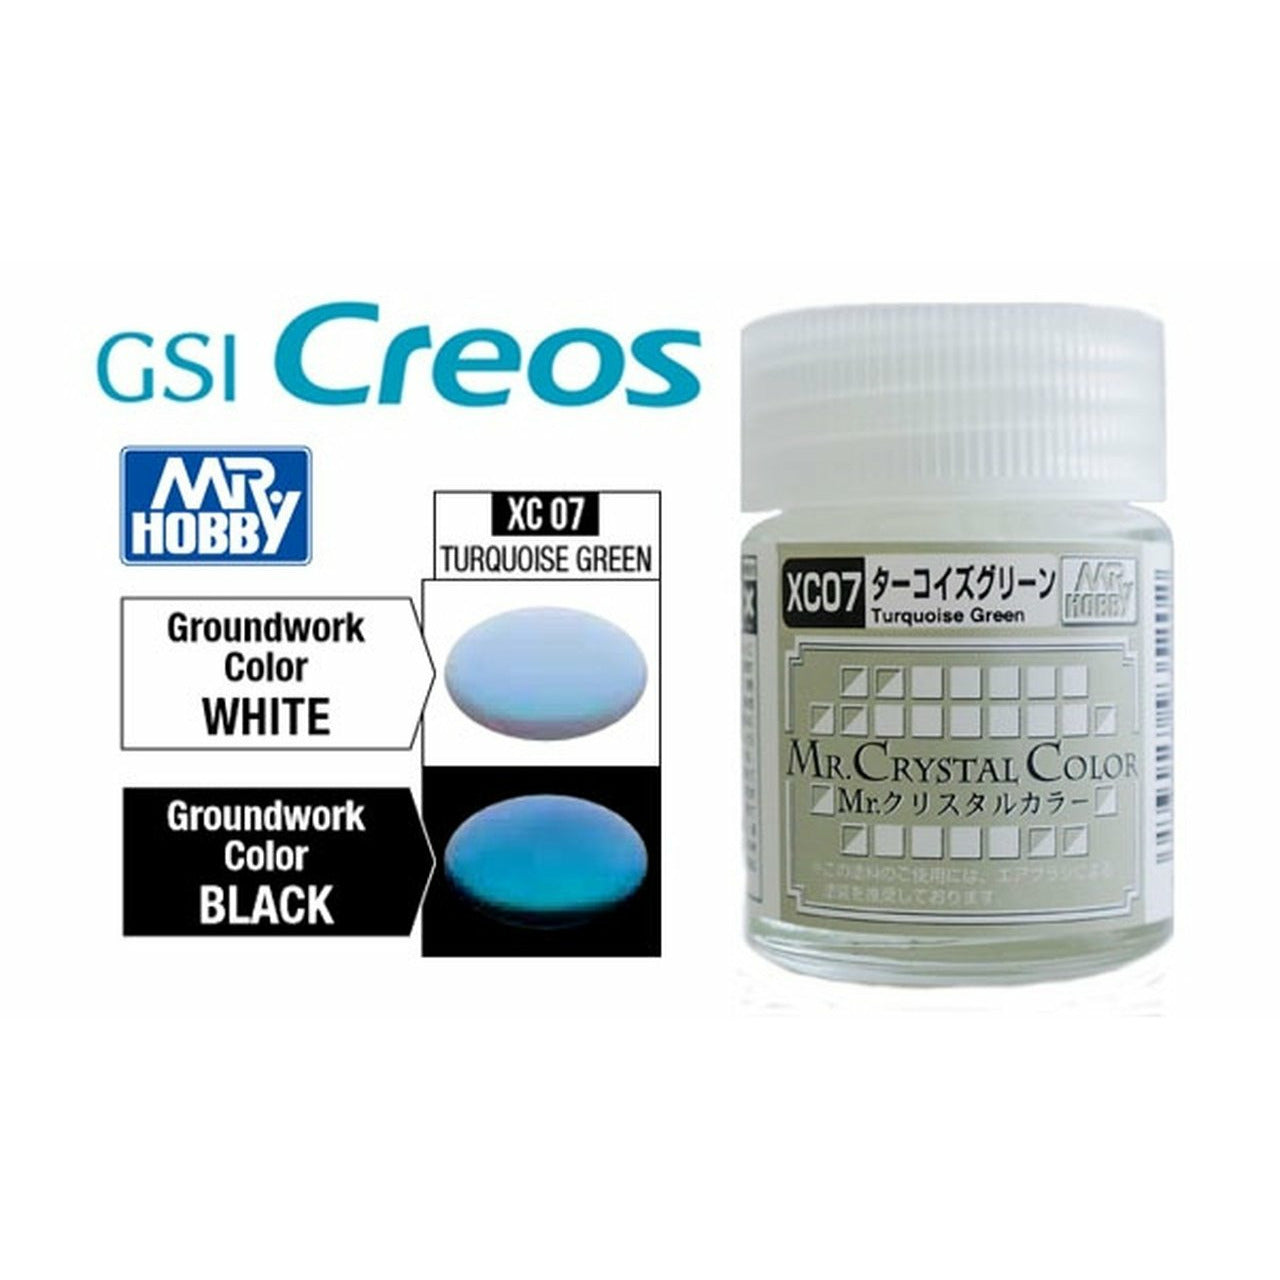 MR HOBBY Mr Crystal Color Turquoise Green - XC07